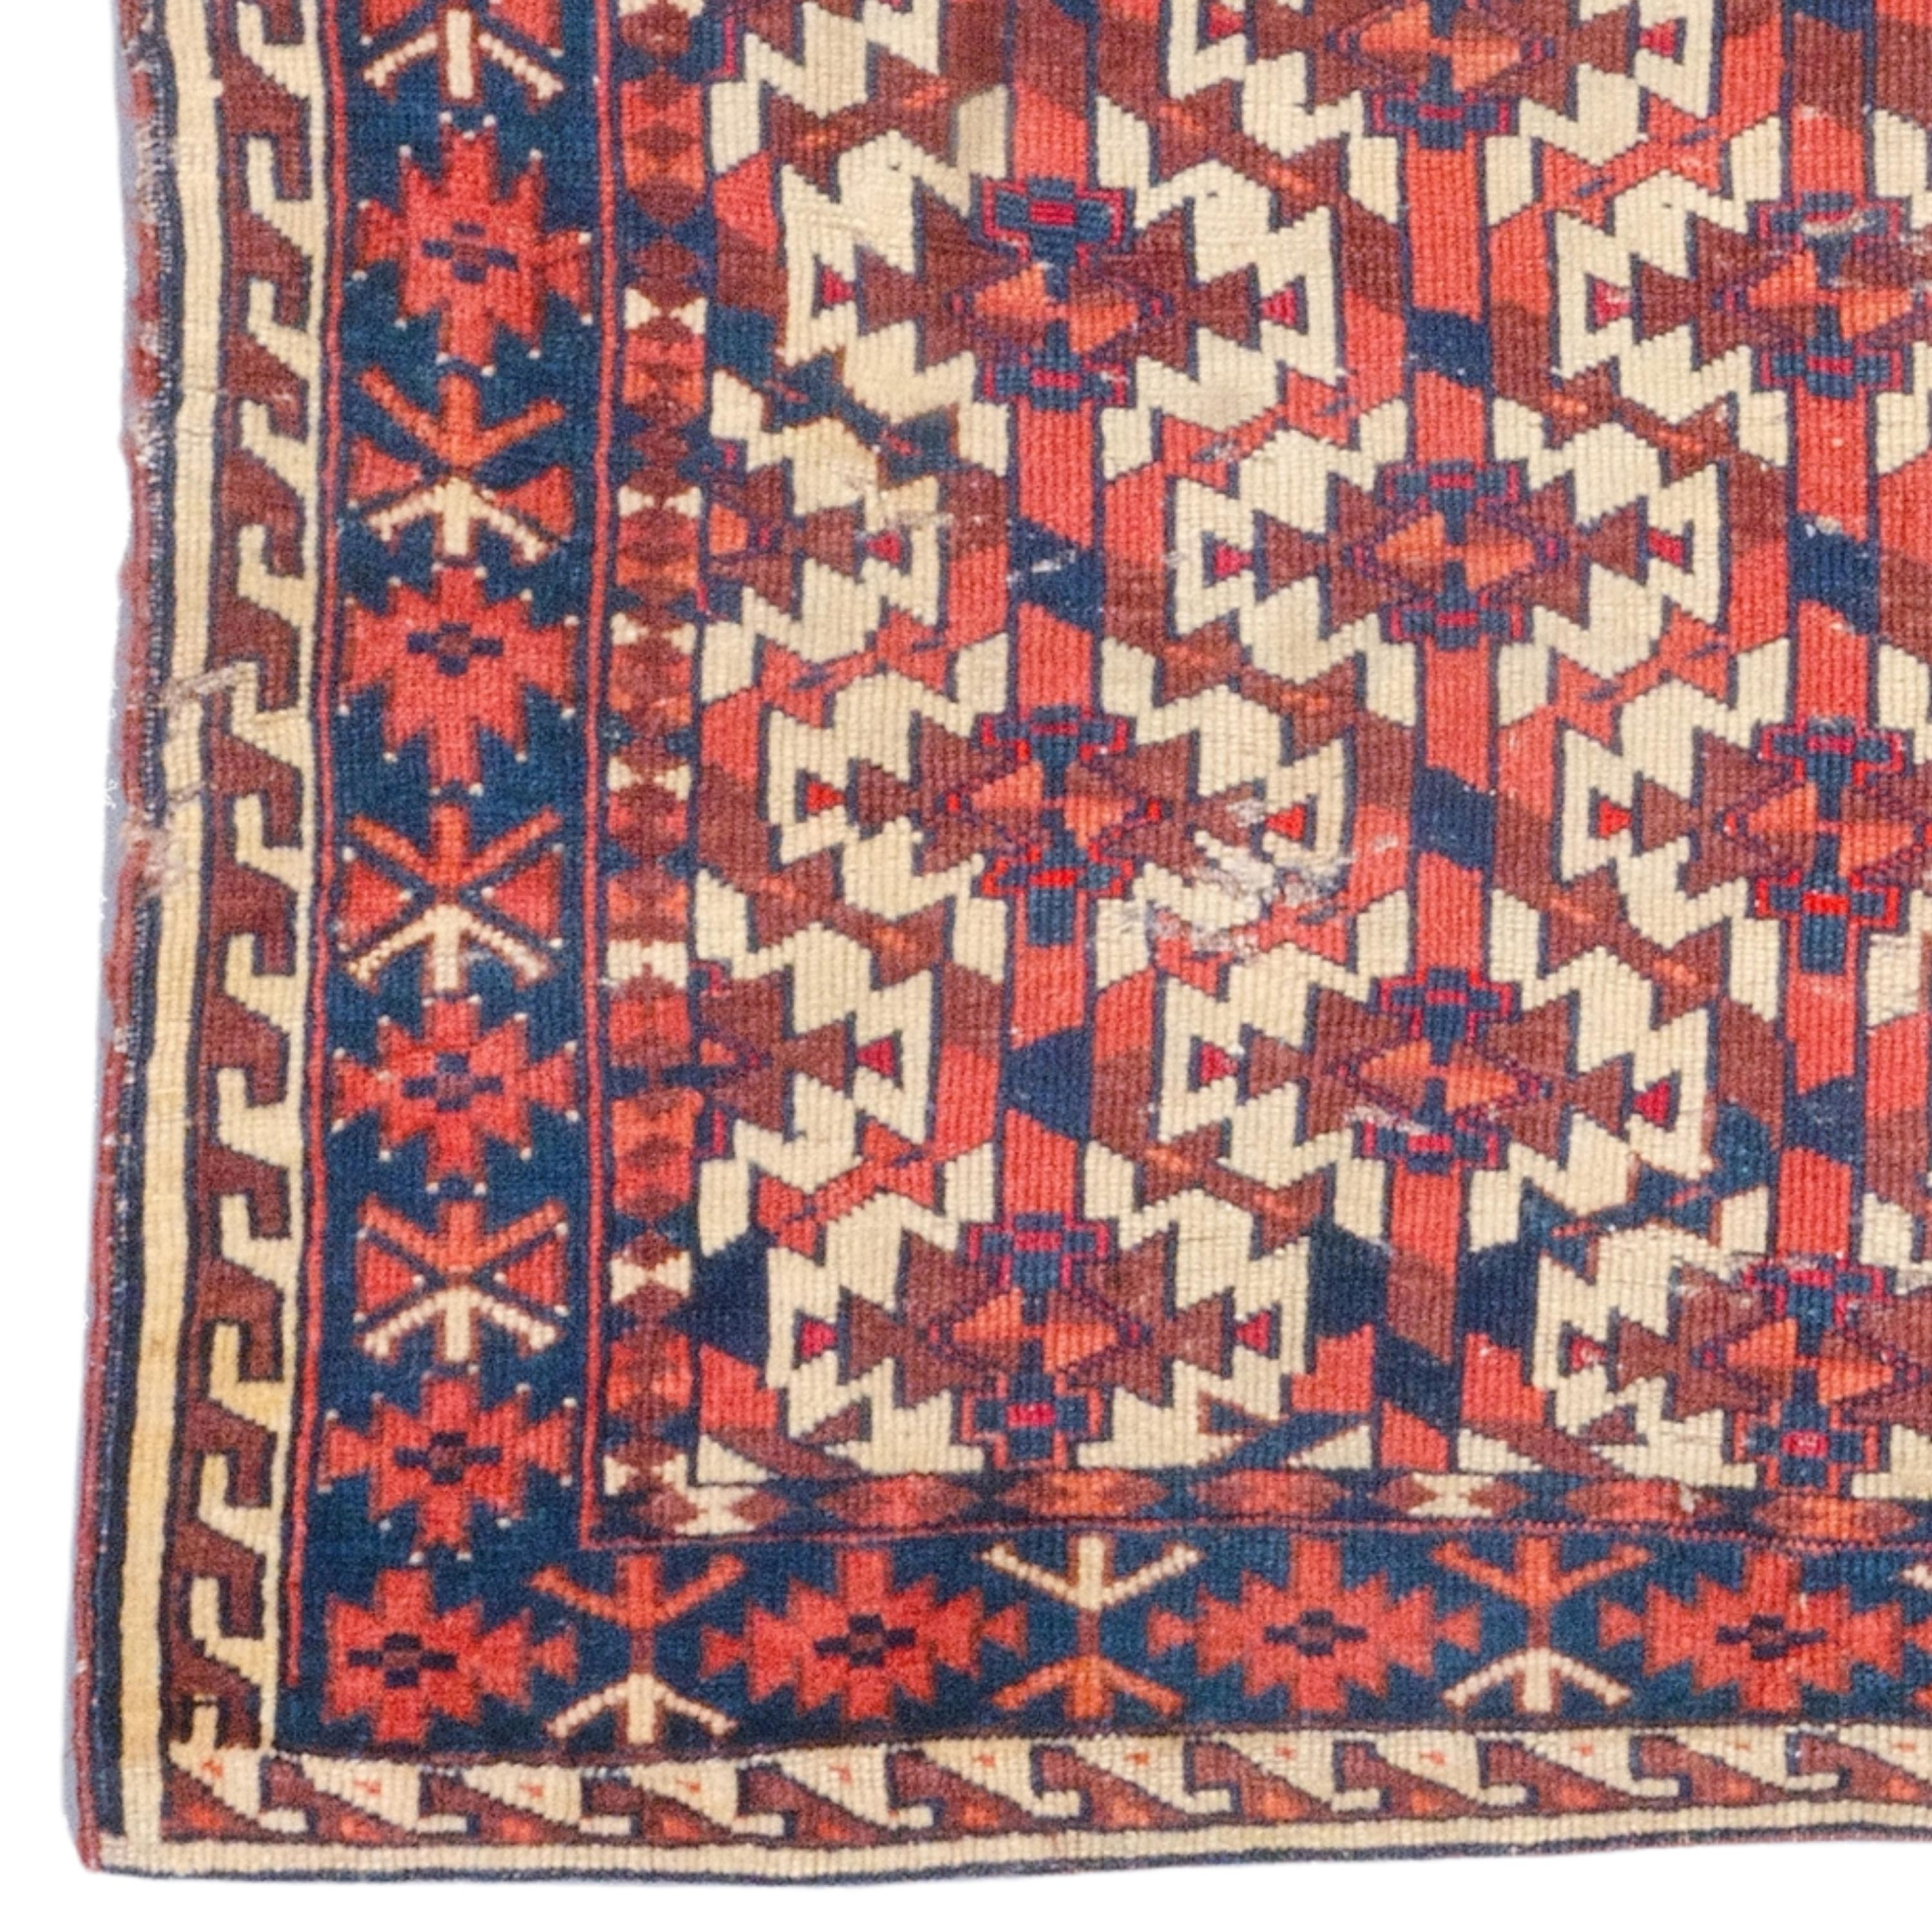 A Unique Piece of the 19th Century: Antique Turkmen Yomud Hanging Carpet

This elegant 19th century Turkmen Yomud Asmalyk rug is a work of art that can enchant any space with its carefully woven details and vibrant colors. Geometric patterns in rich